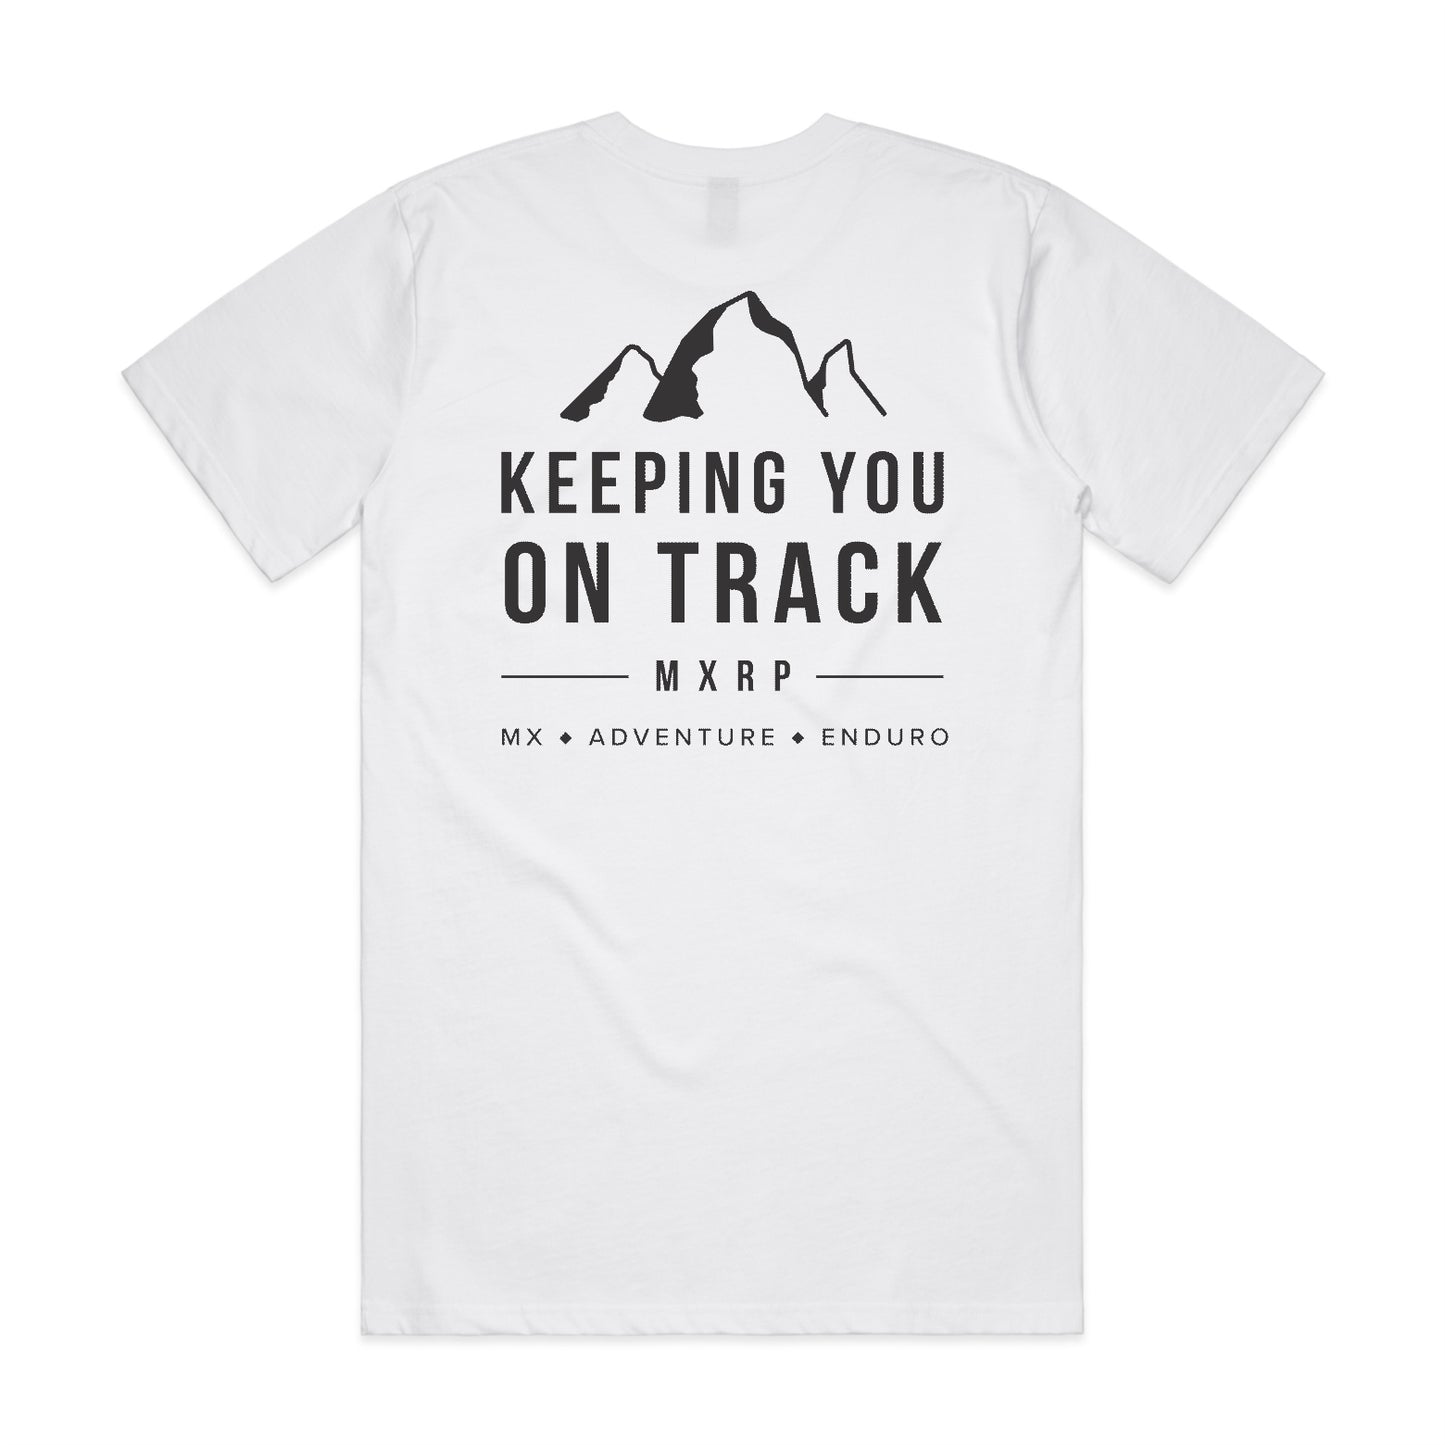 KEEPING YOU ON TRACK TEE